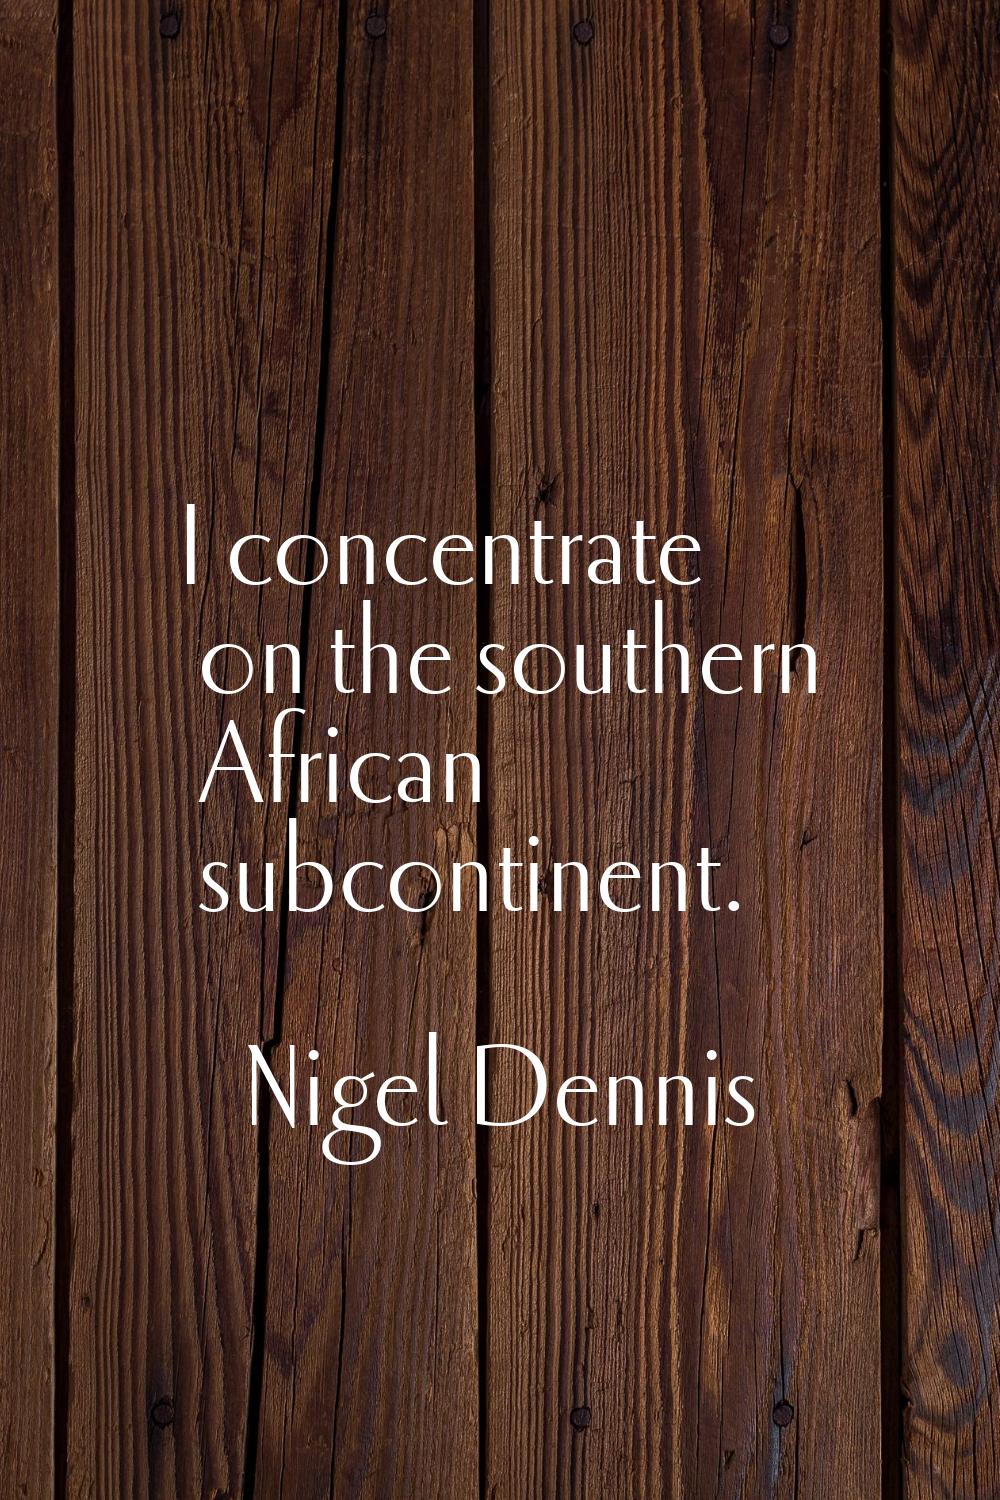 I concentrate on the southern African subcontinent.